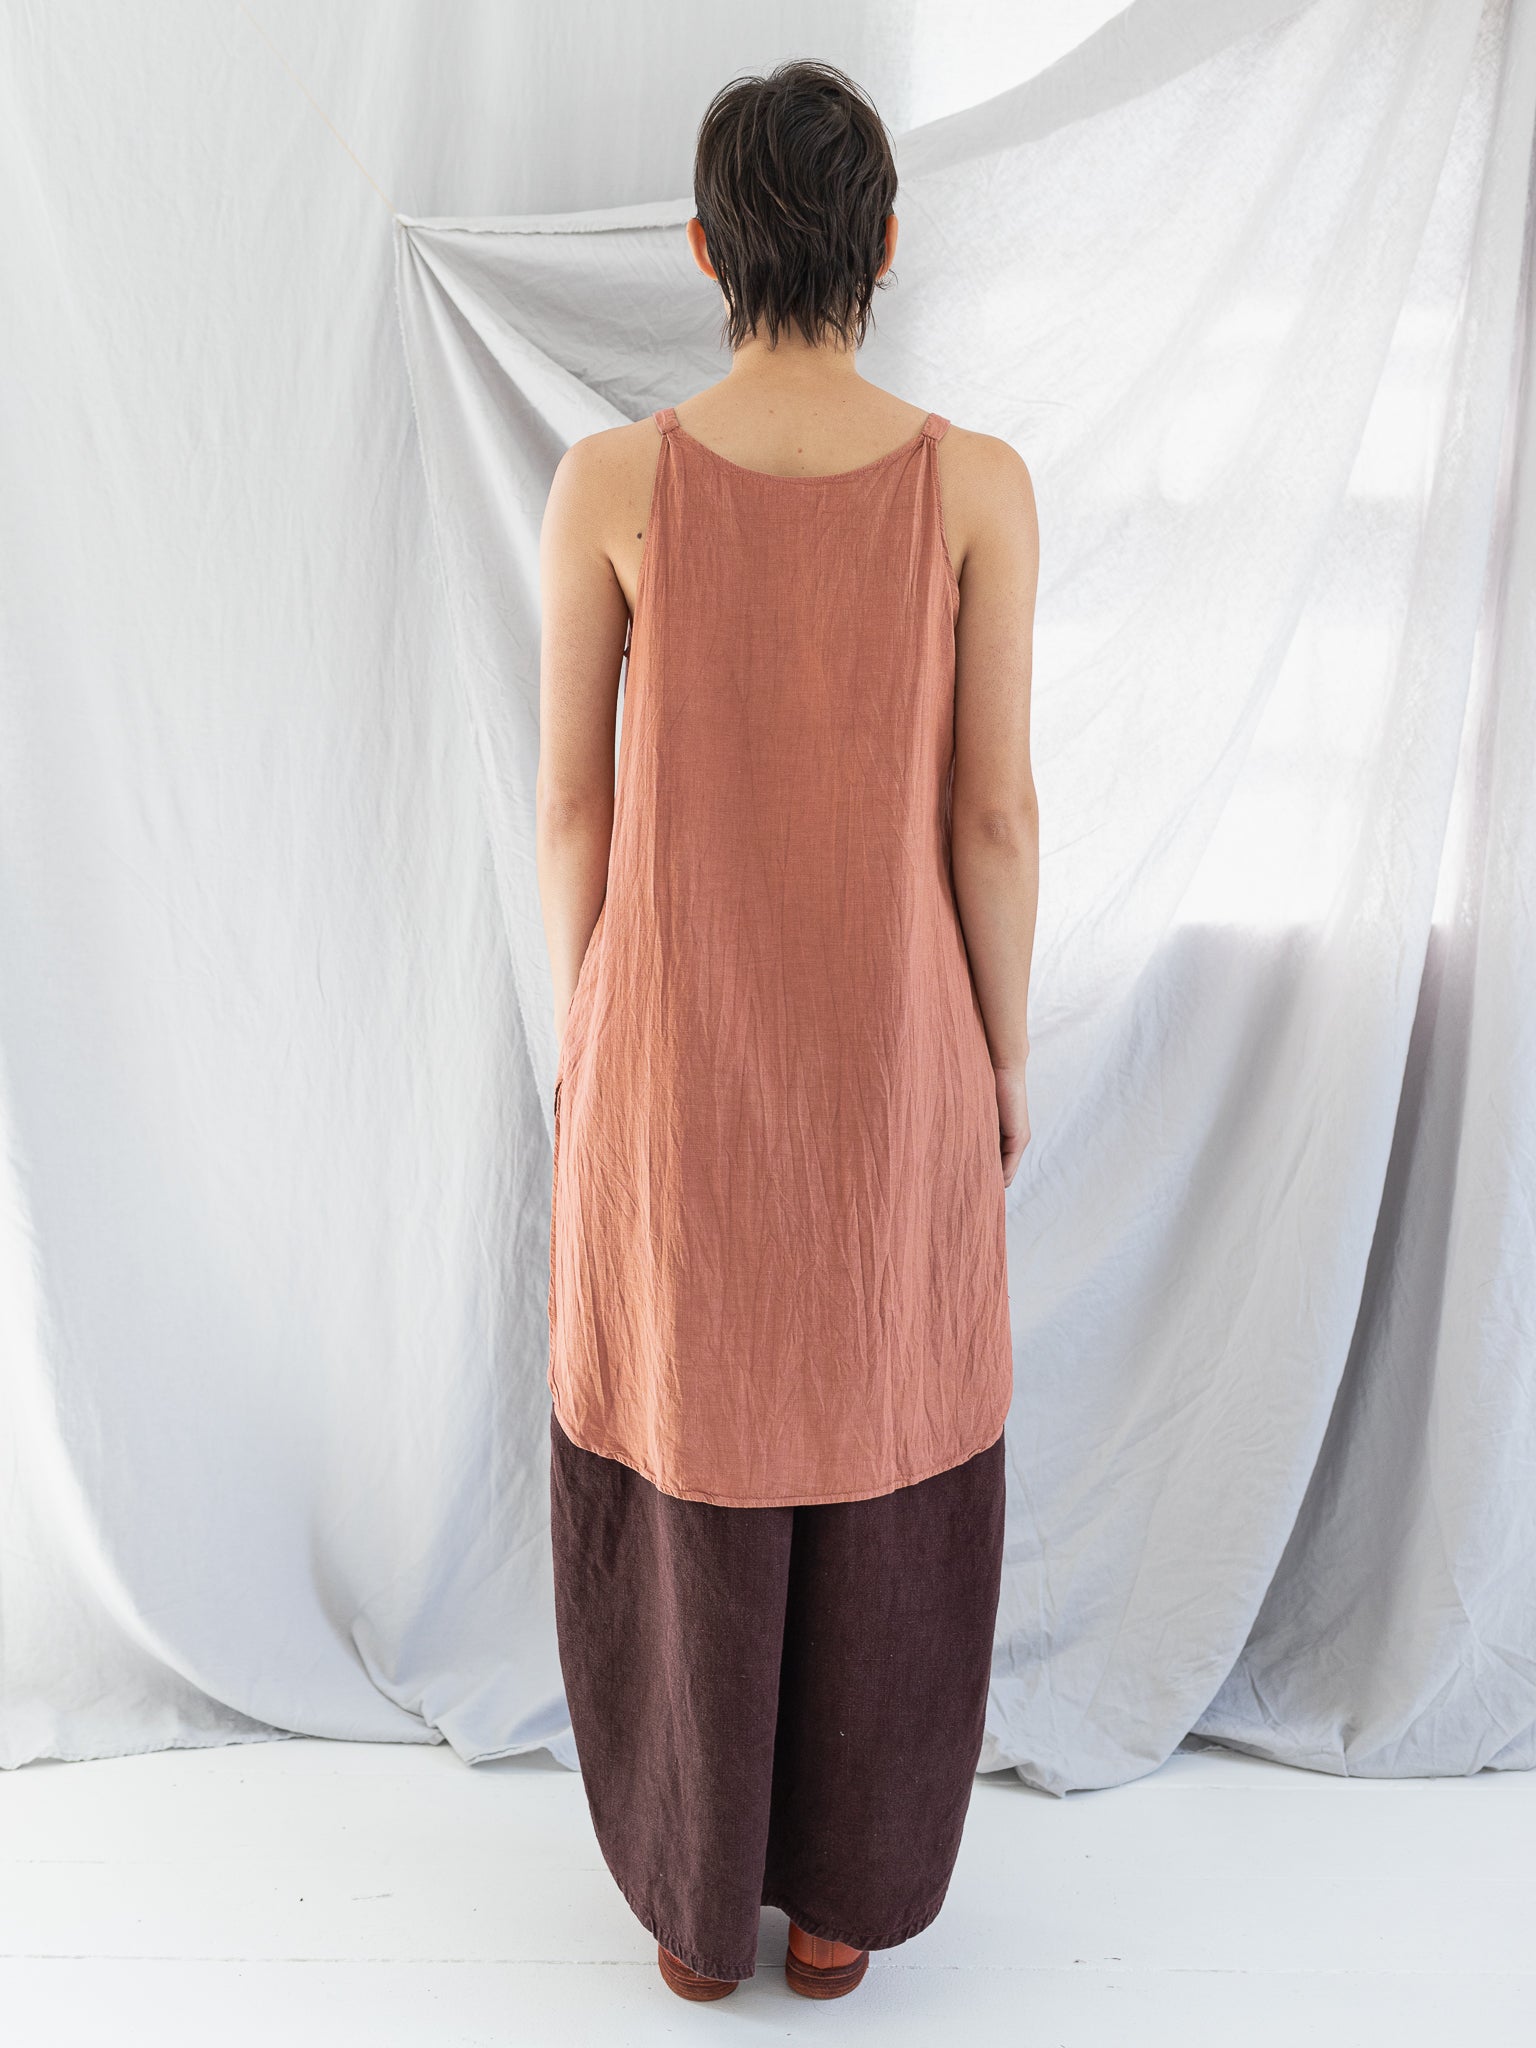 Atelier Suppan Long Top, Old Rose - Worthwhile